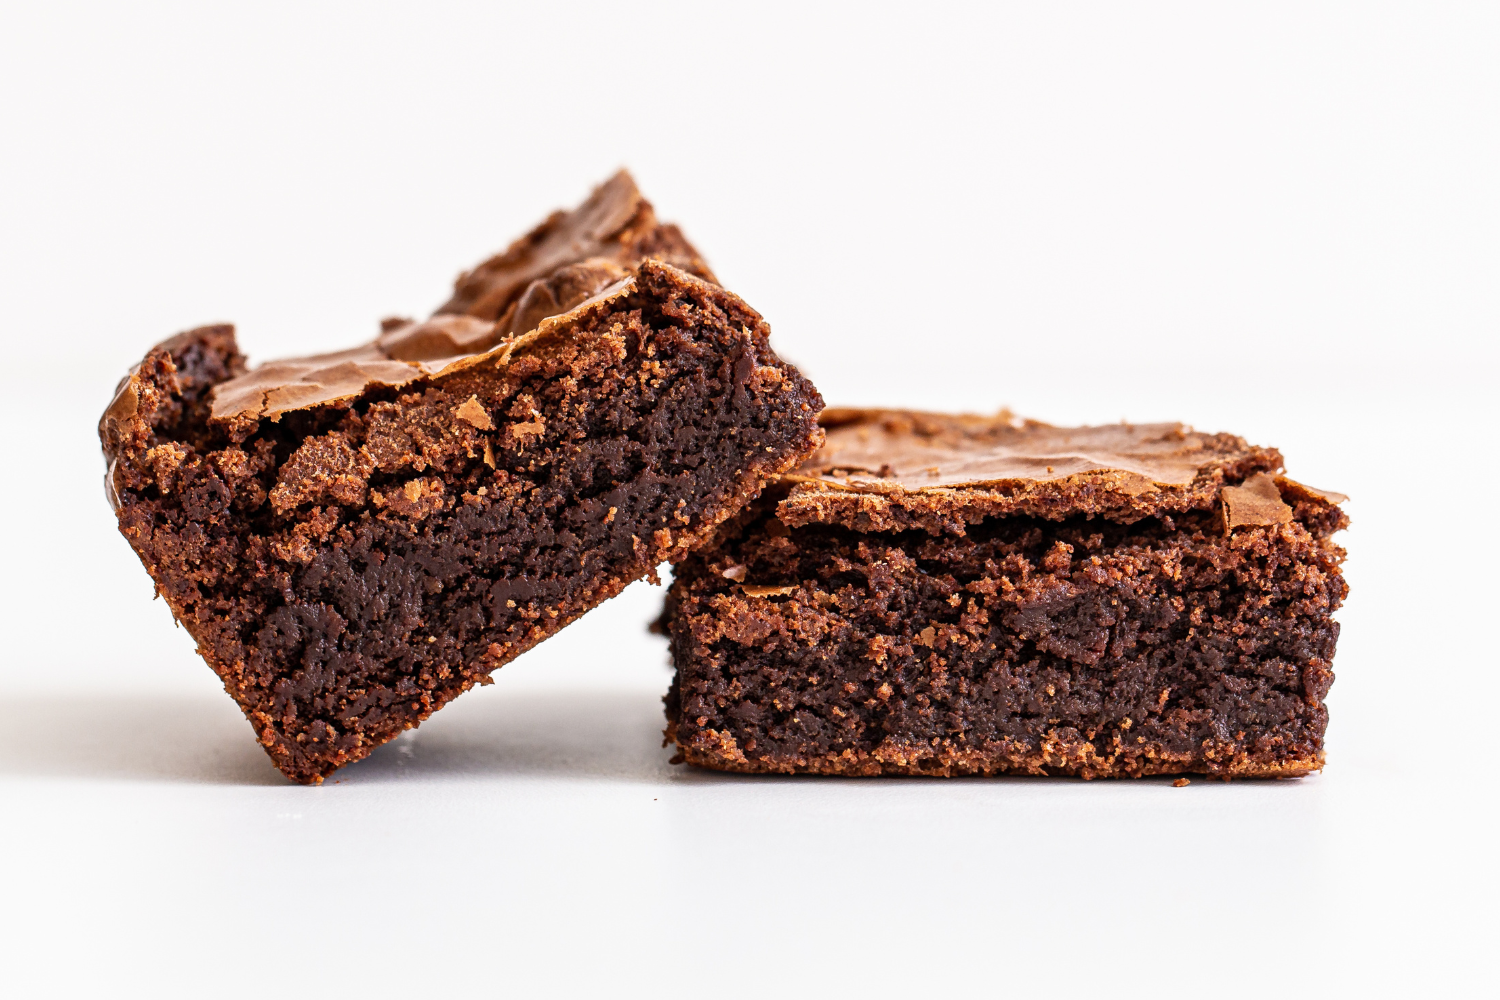 two fudgy brownies stacked on top of each other, showing the gorgeous shiny crust and the rich, fudgy center